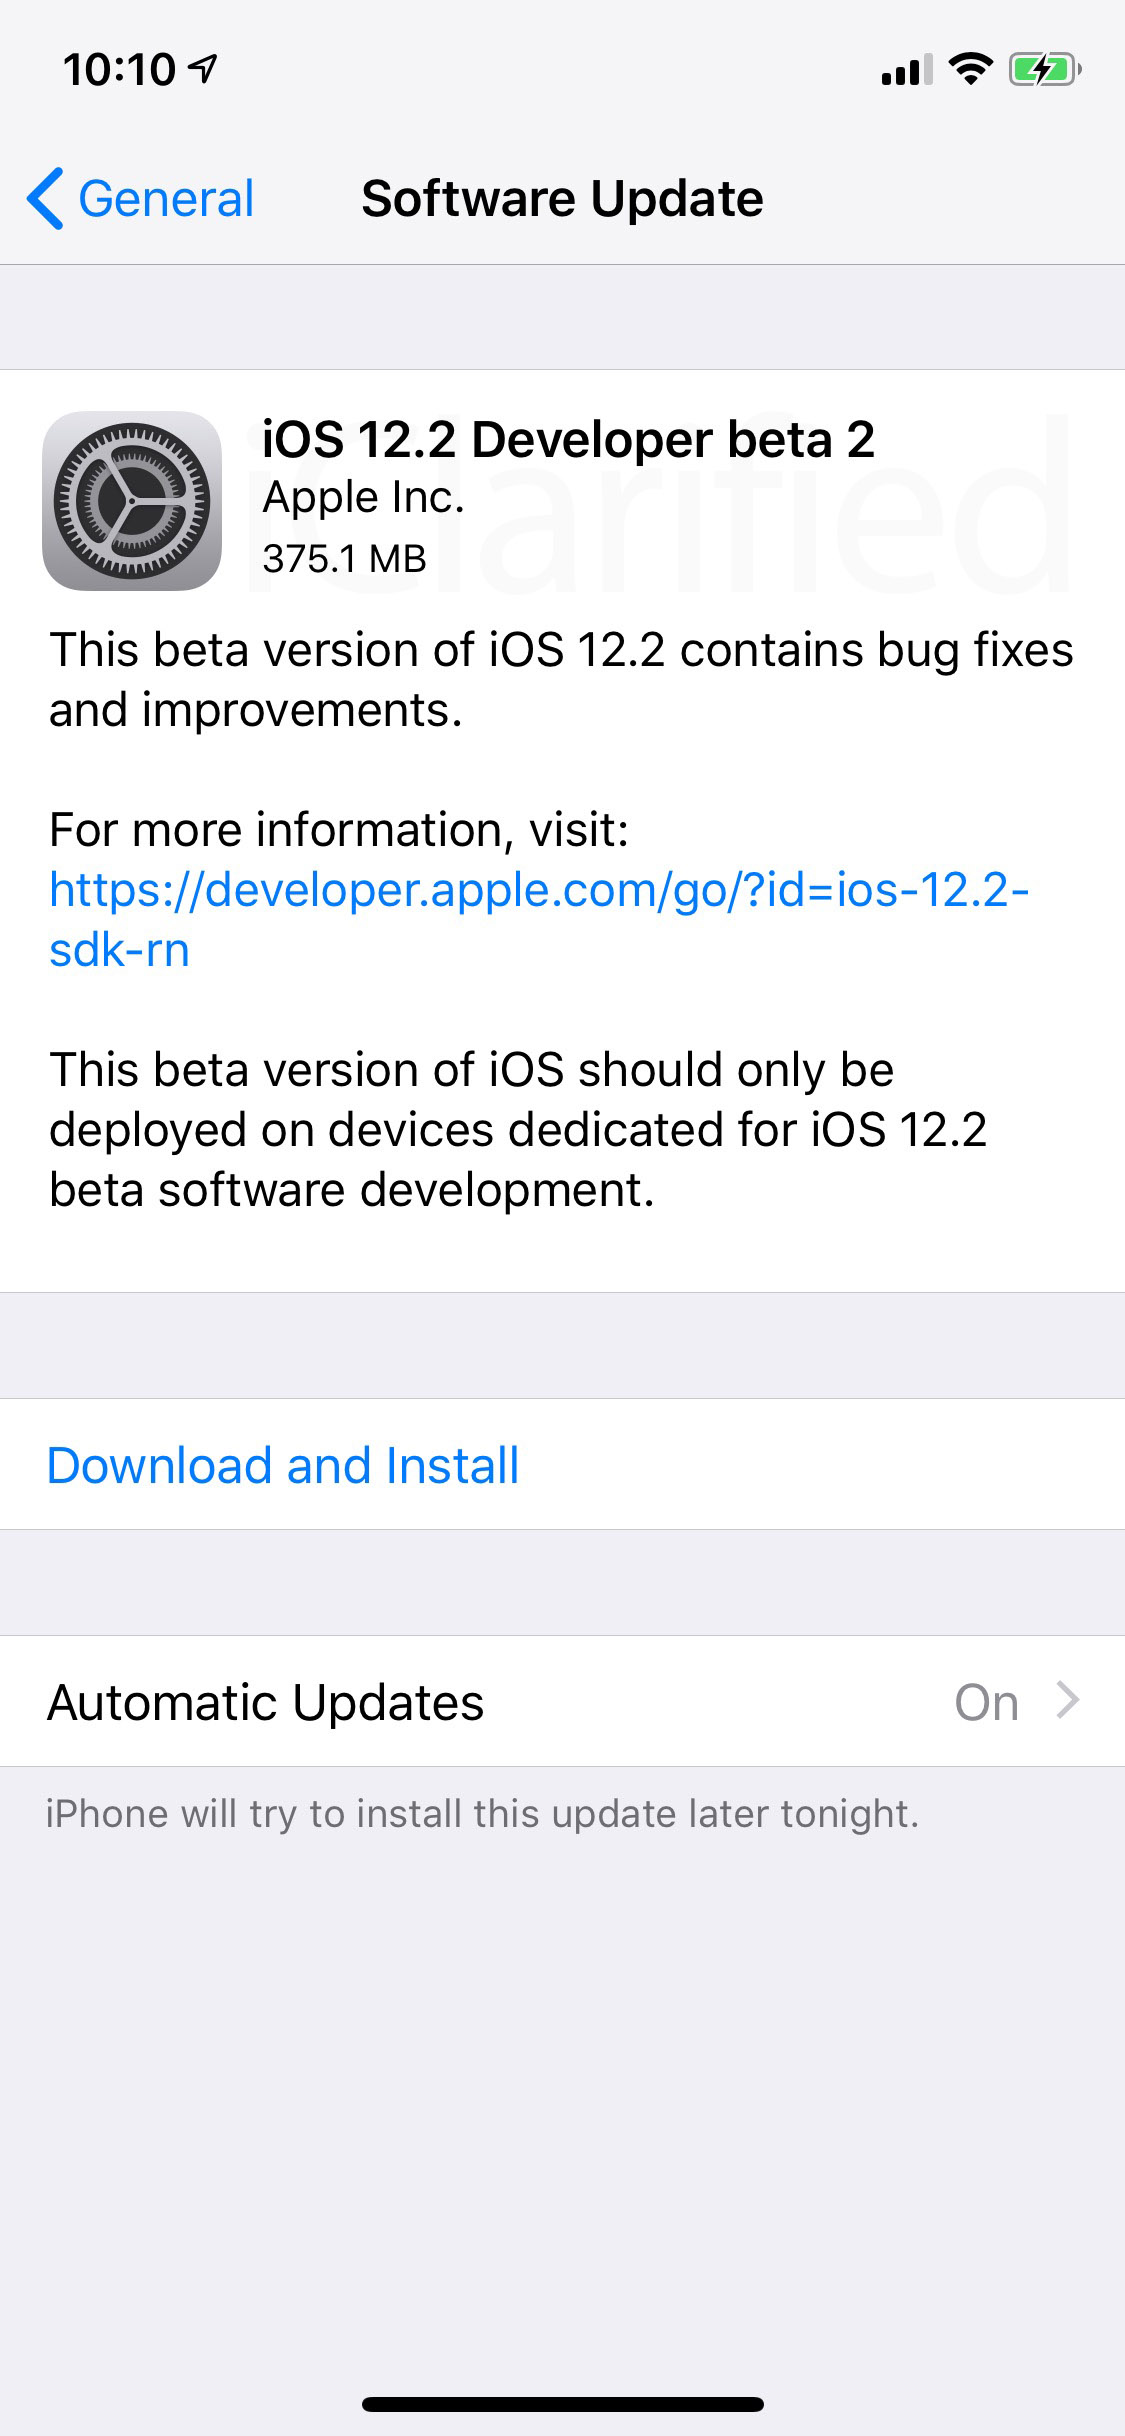 Apple Releases iOS 12.2 Beta 2 to Developers [Download]